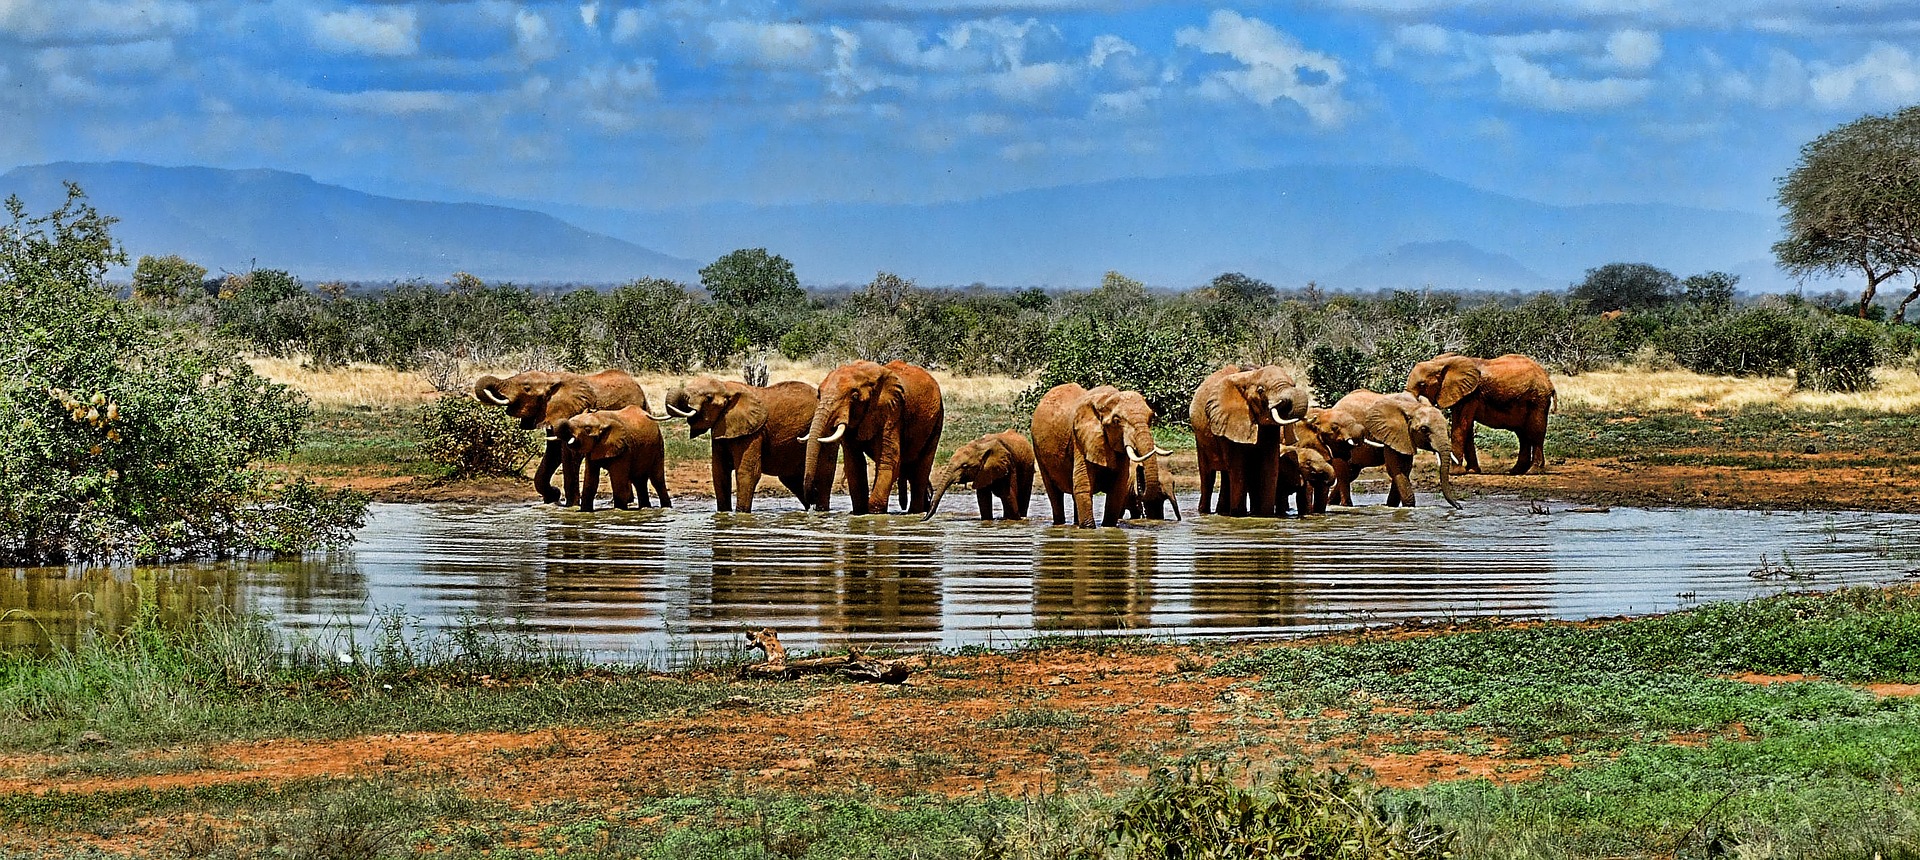 A herd of Elephants drinking water surrounded by grass and trees - Cultural Tour of Ghana & South Africa